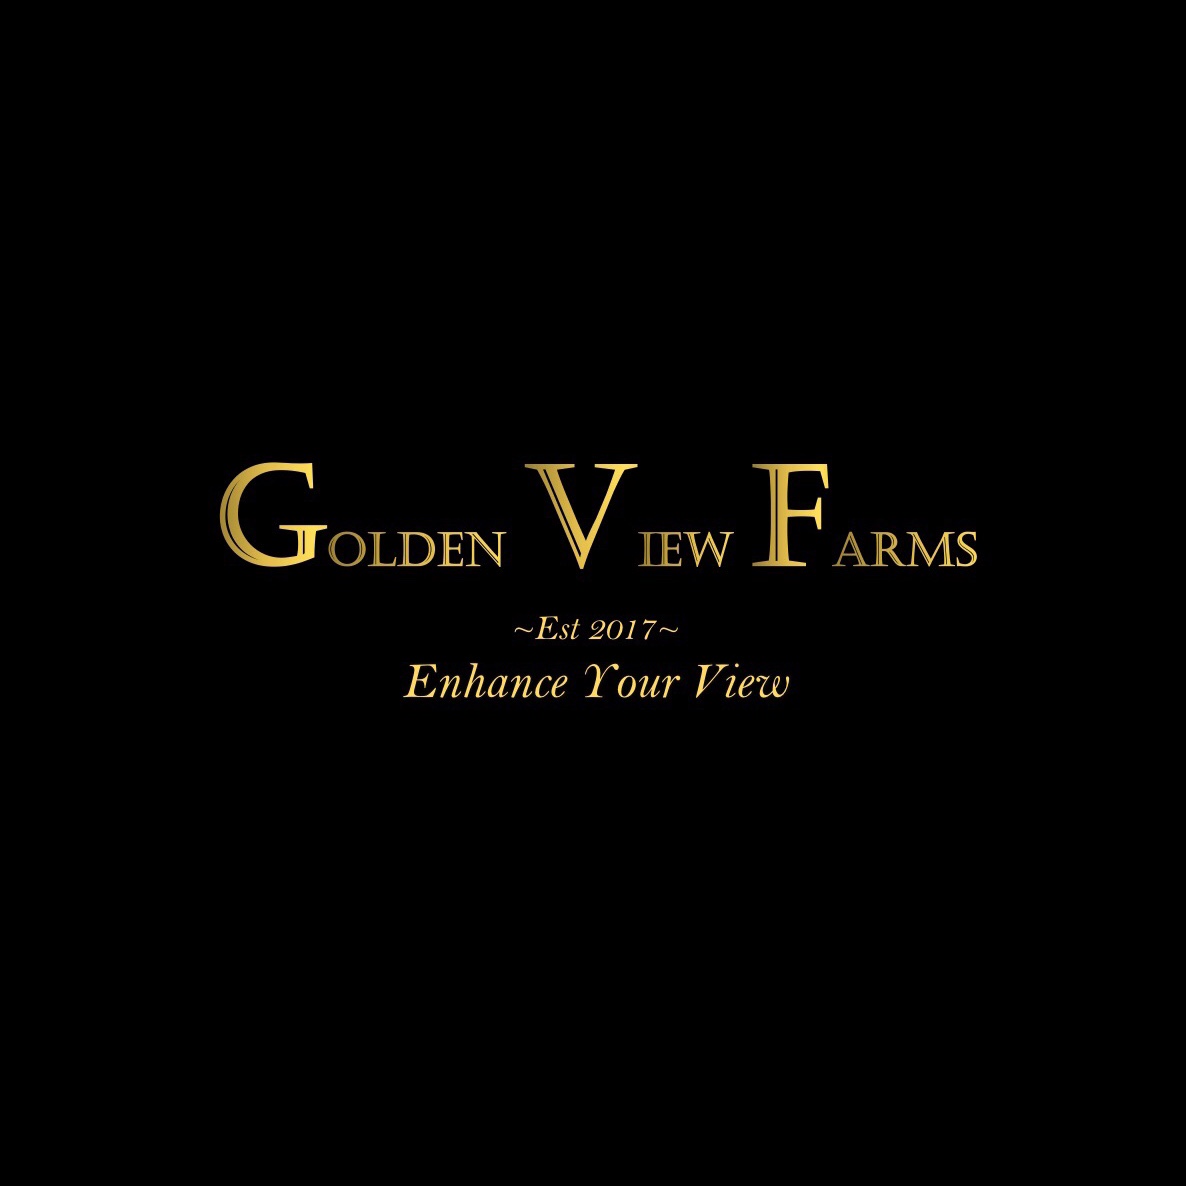 Golden Fresh farms owned by